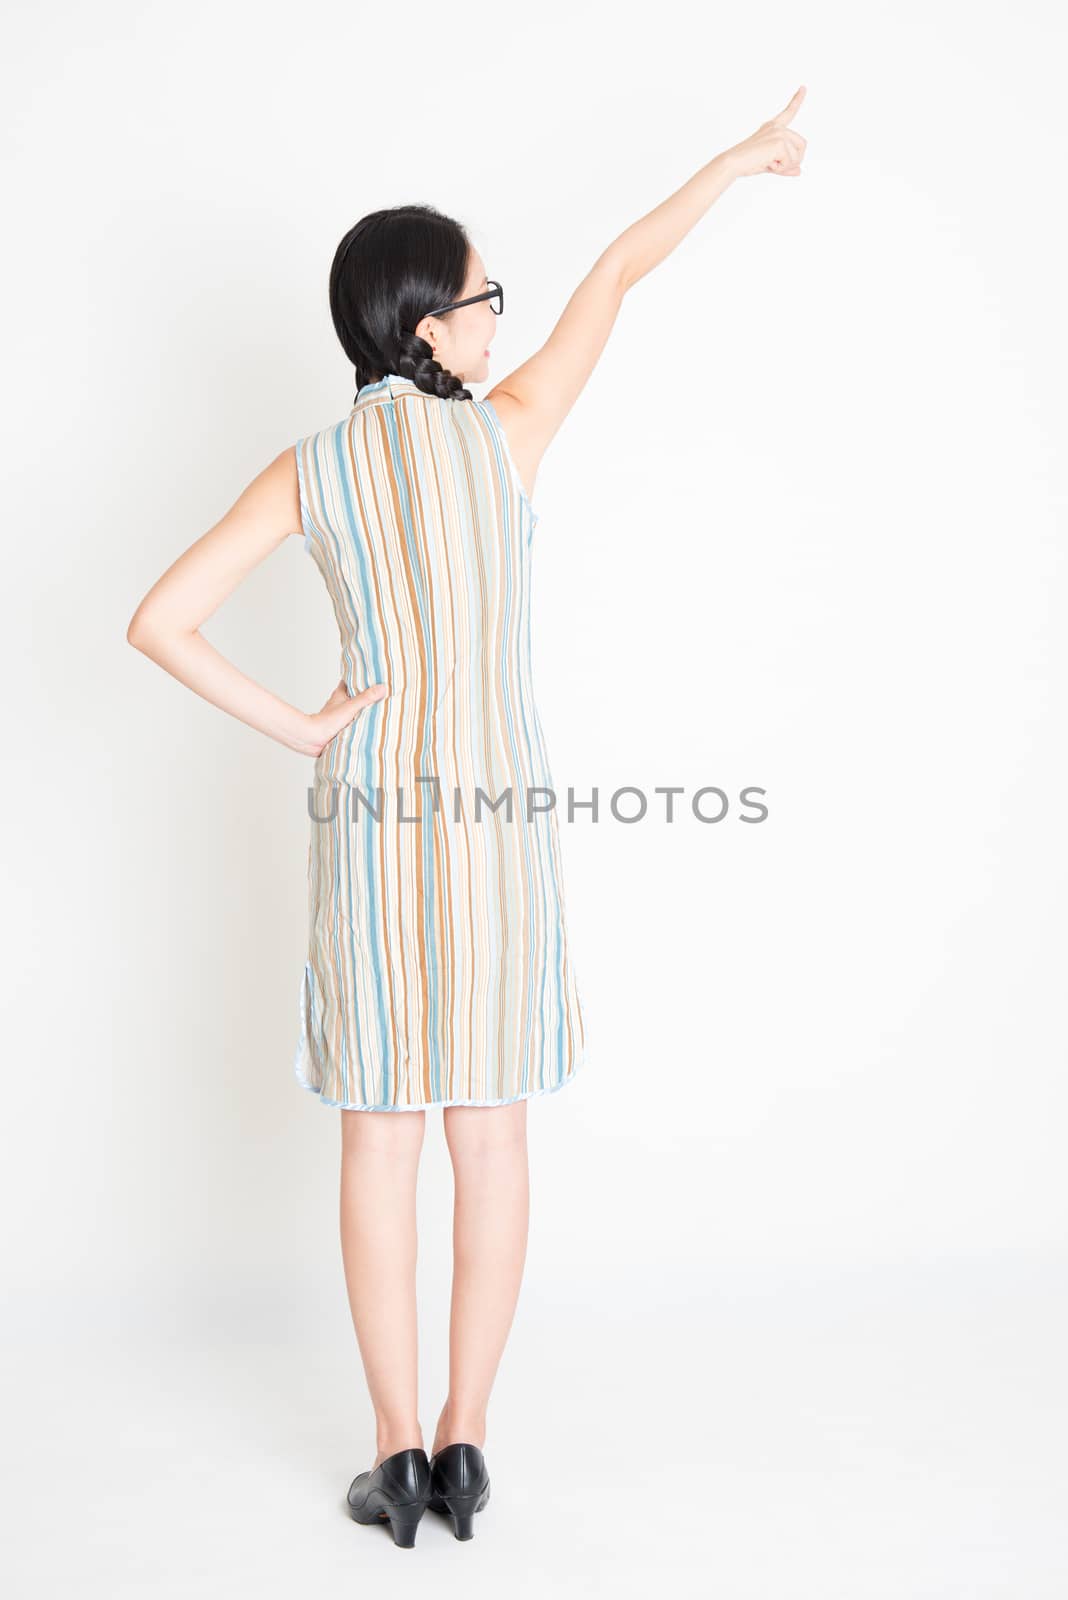 Rear view of young Asian girl in traditional qipao dress hand pointing away, full length standing on plain background.